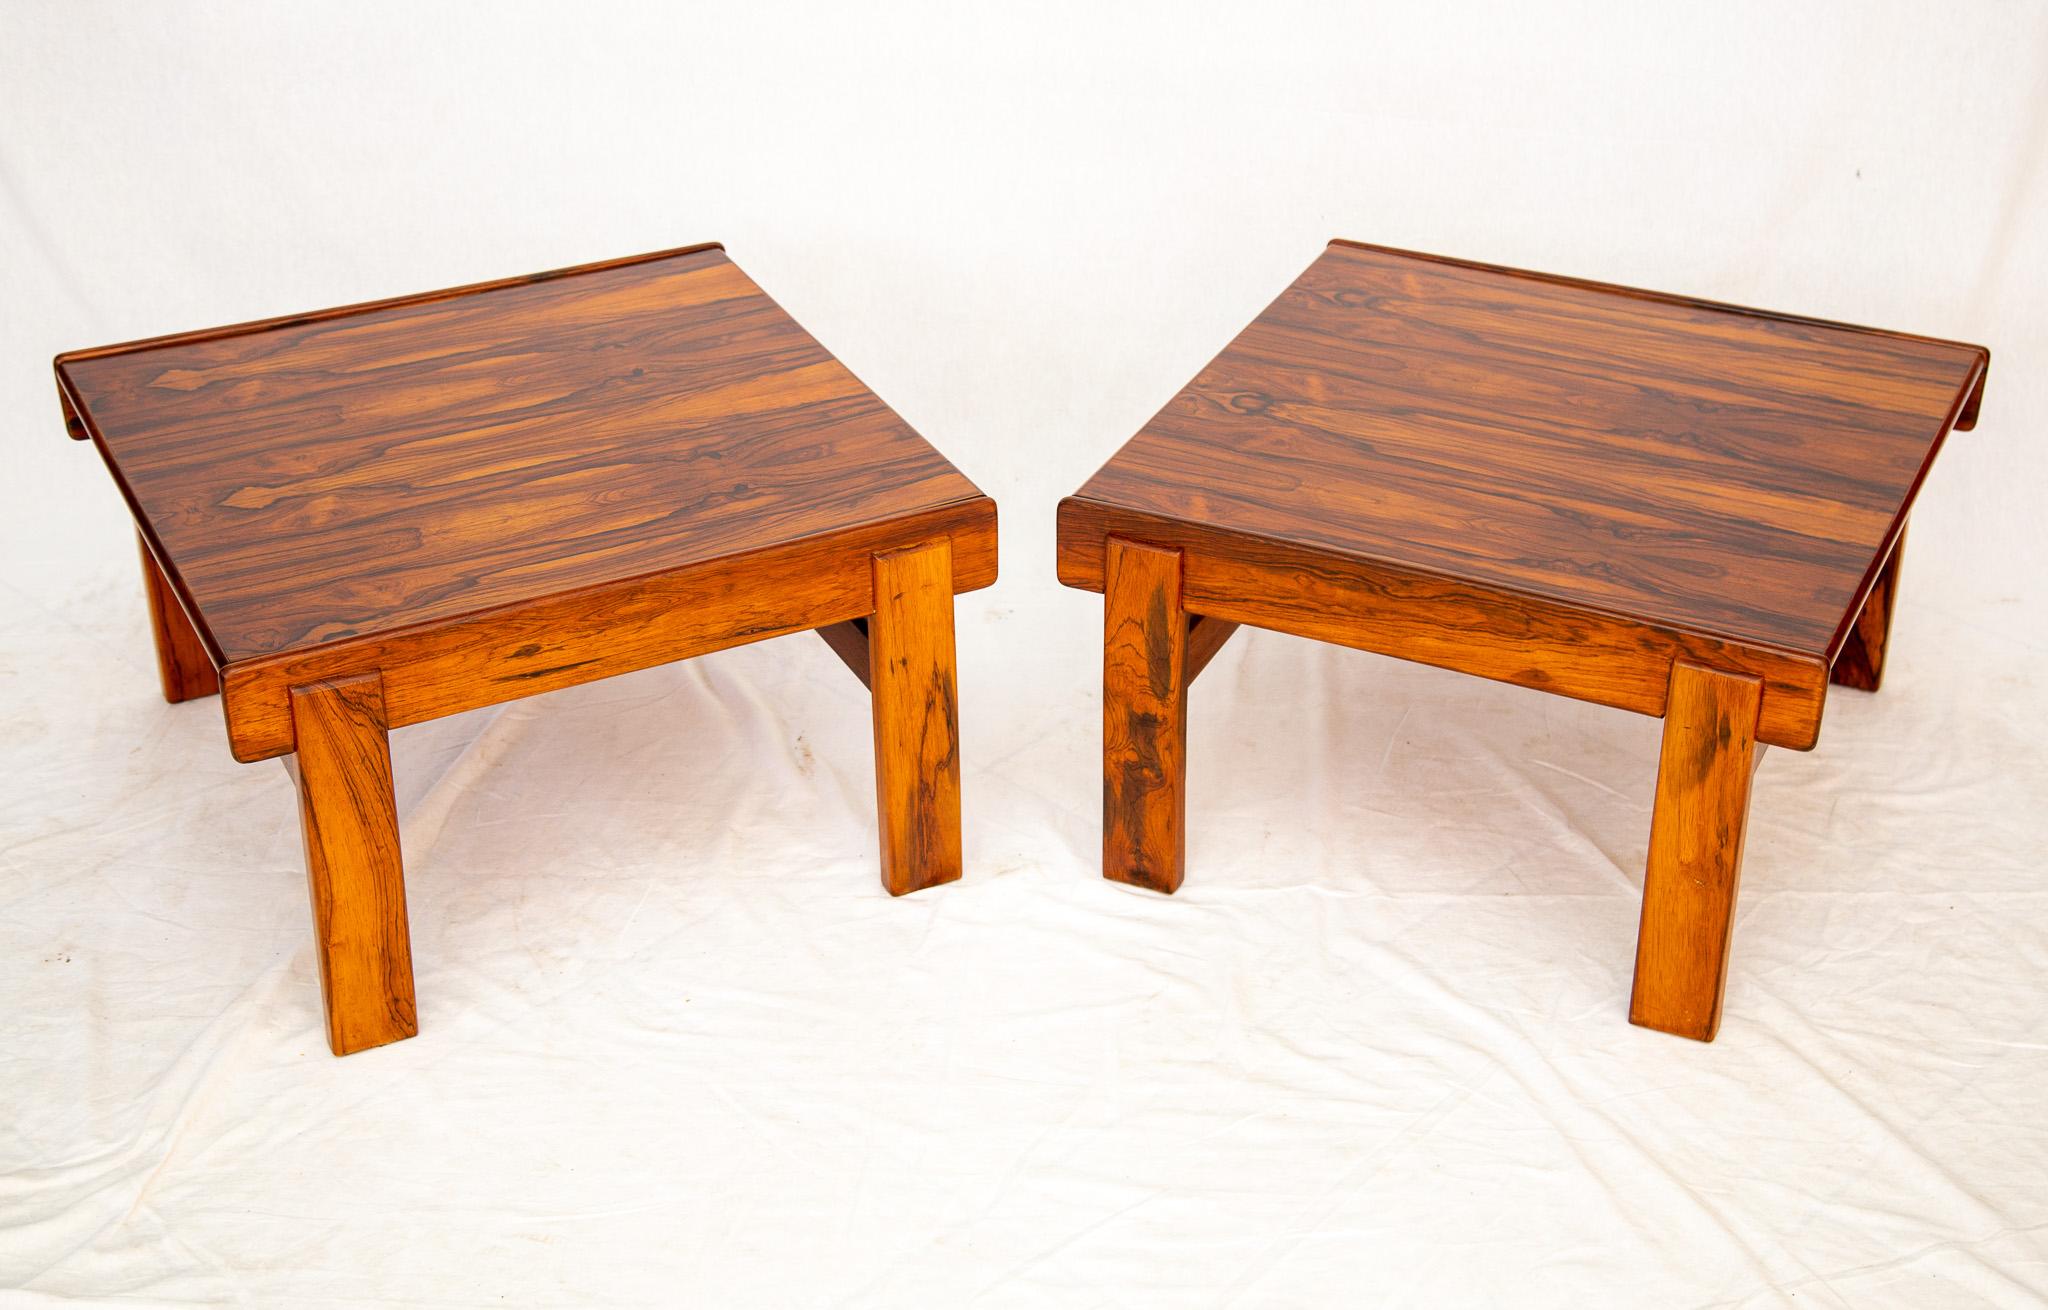 Midcentury Modern Side Table set in Hardwood by Jean Gillon, 1960s For Sale 8